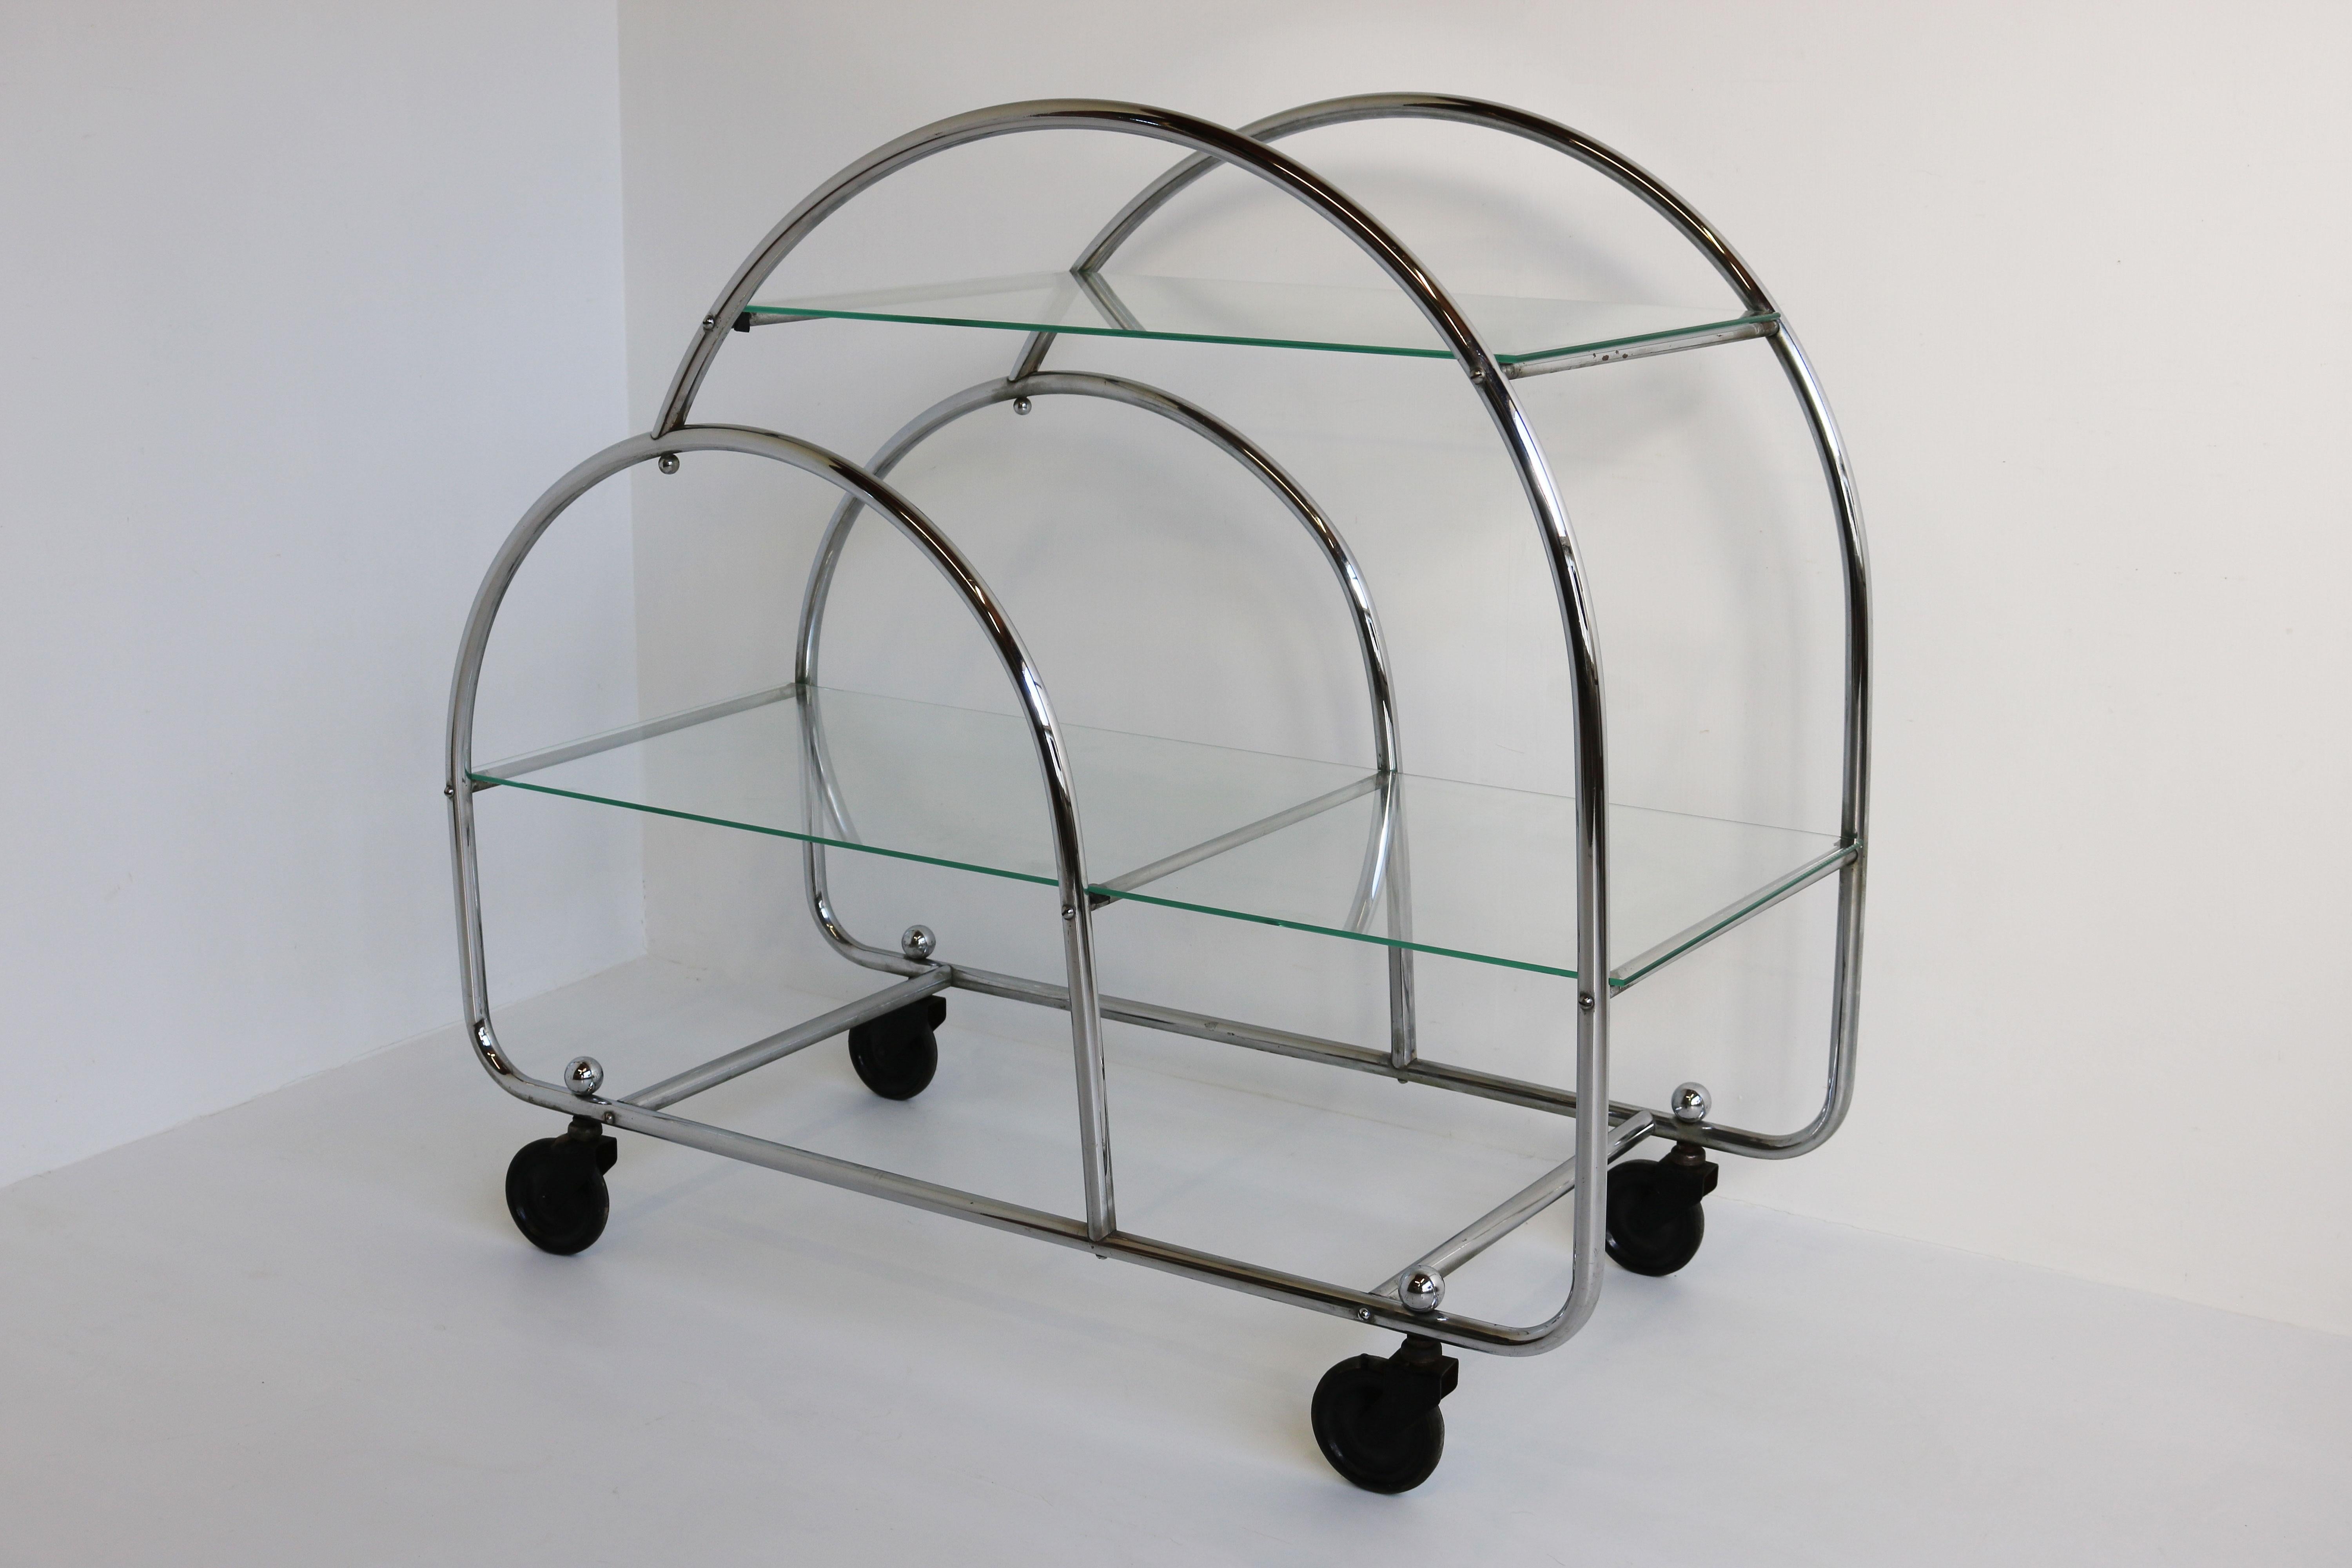 Gorgeous fully original Art Deco Bauhaus Bar cart in Chrome & glass from the 1930s. 
Marvelous Art Deco design with the chrome hoops & two tiers of glass. 
Gorgeous timeless antique piece that will make a lasting impression. 
Will fit in almost